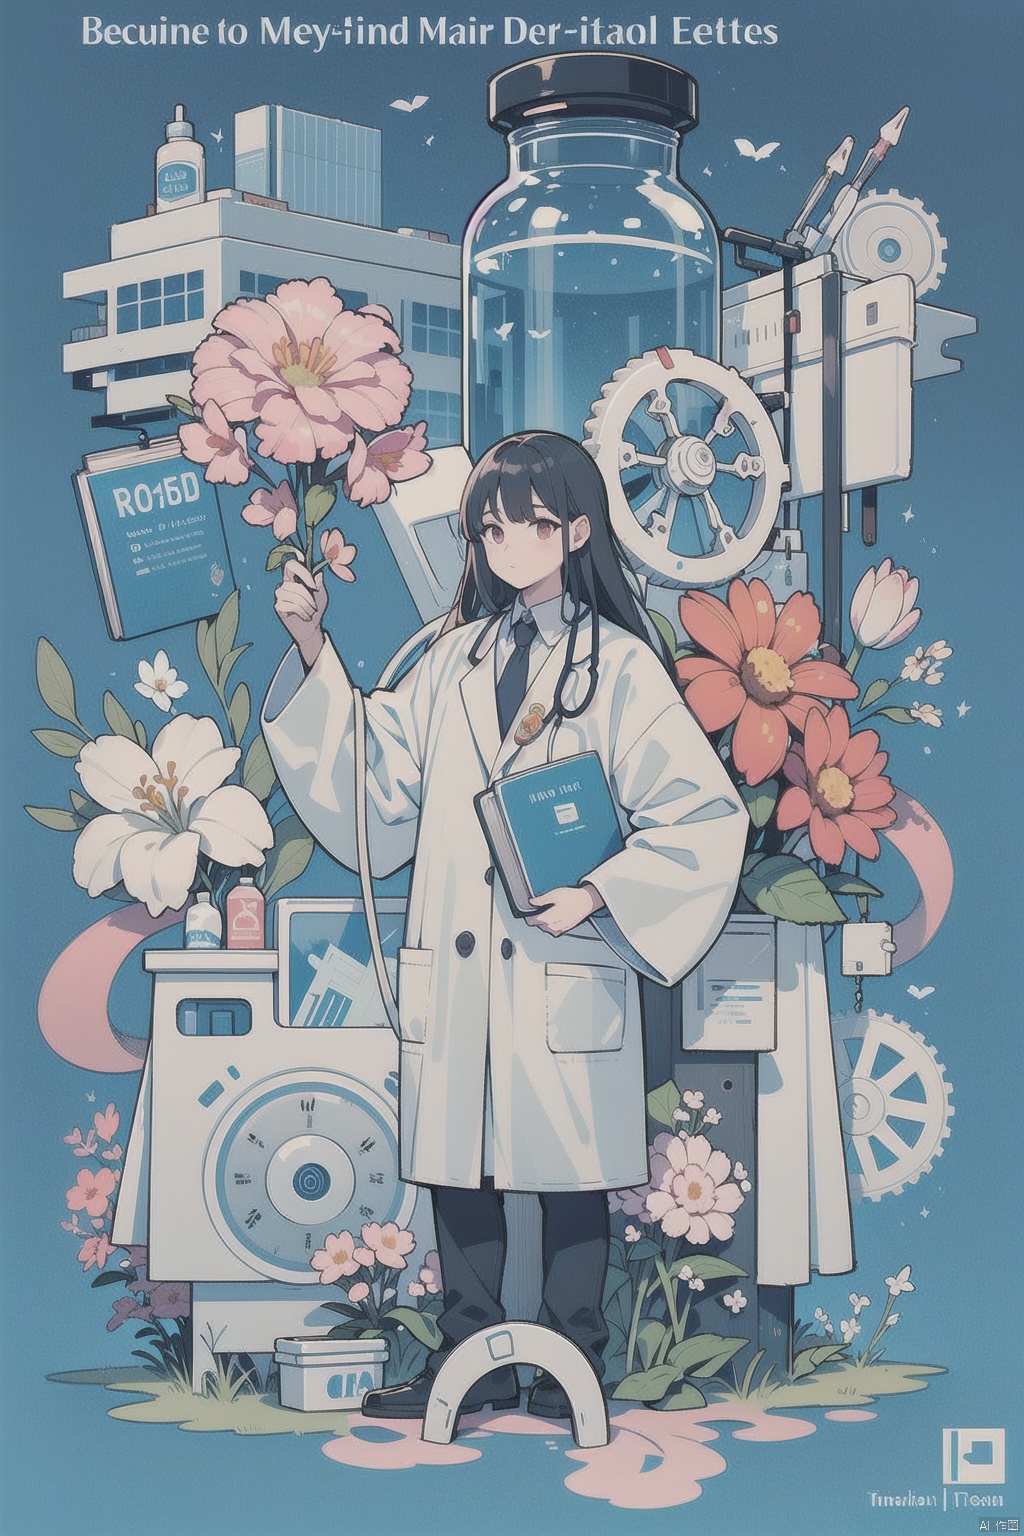  A half-body doctor with medical instruments, bottles, syringes, stethoscopes, gears, machinery, buildings, flowers in the distance, book, leaf, pink flower